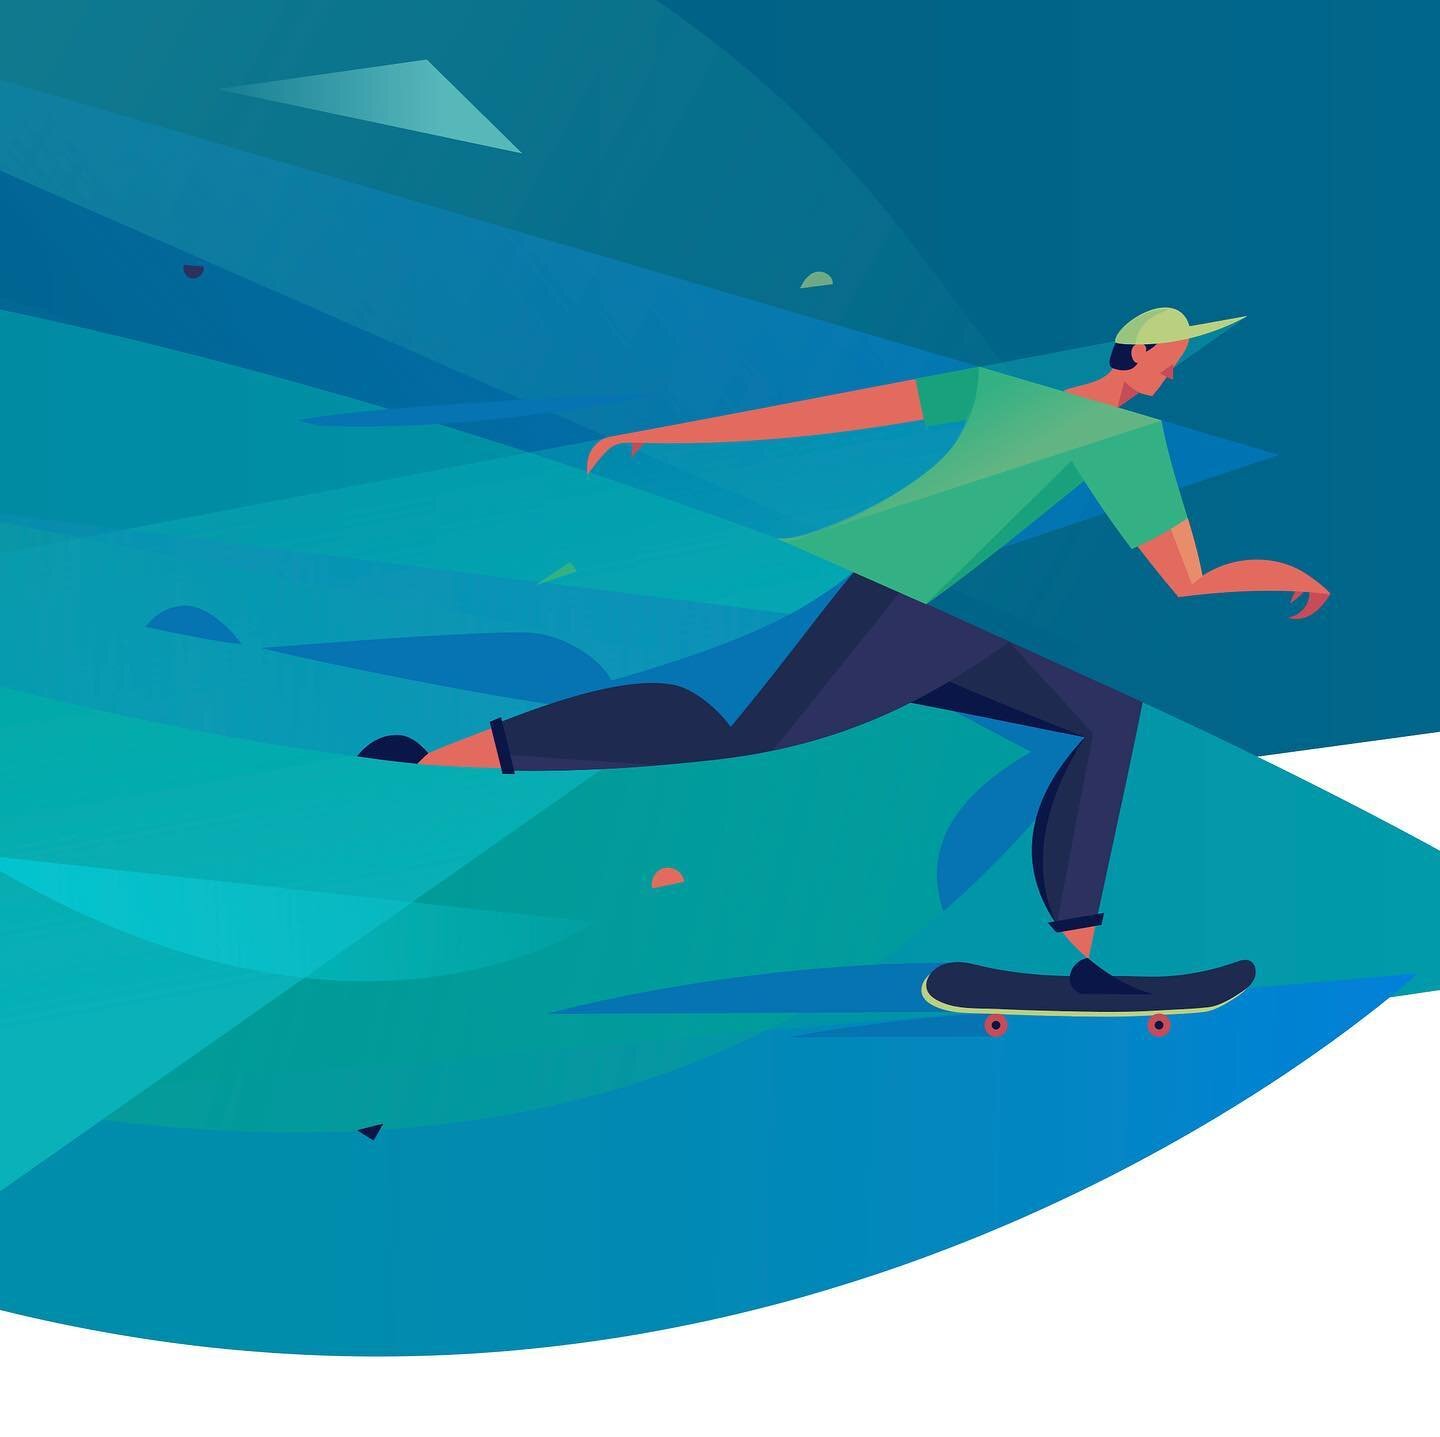 Speedy skater guy for Speedcurve&rsquo;s homepage 🤘 I created this geometric, flowing style as part of my visual language redesign for their marketing site, and I couldn&rsquo;t be more stoked with how this project is looking in it&rsquo;s initial r